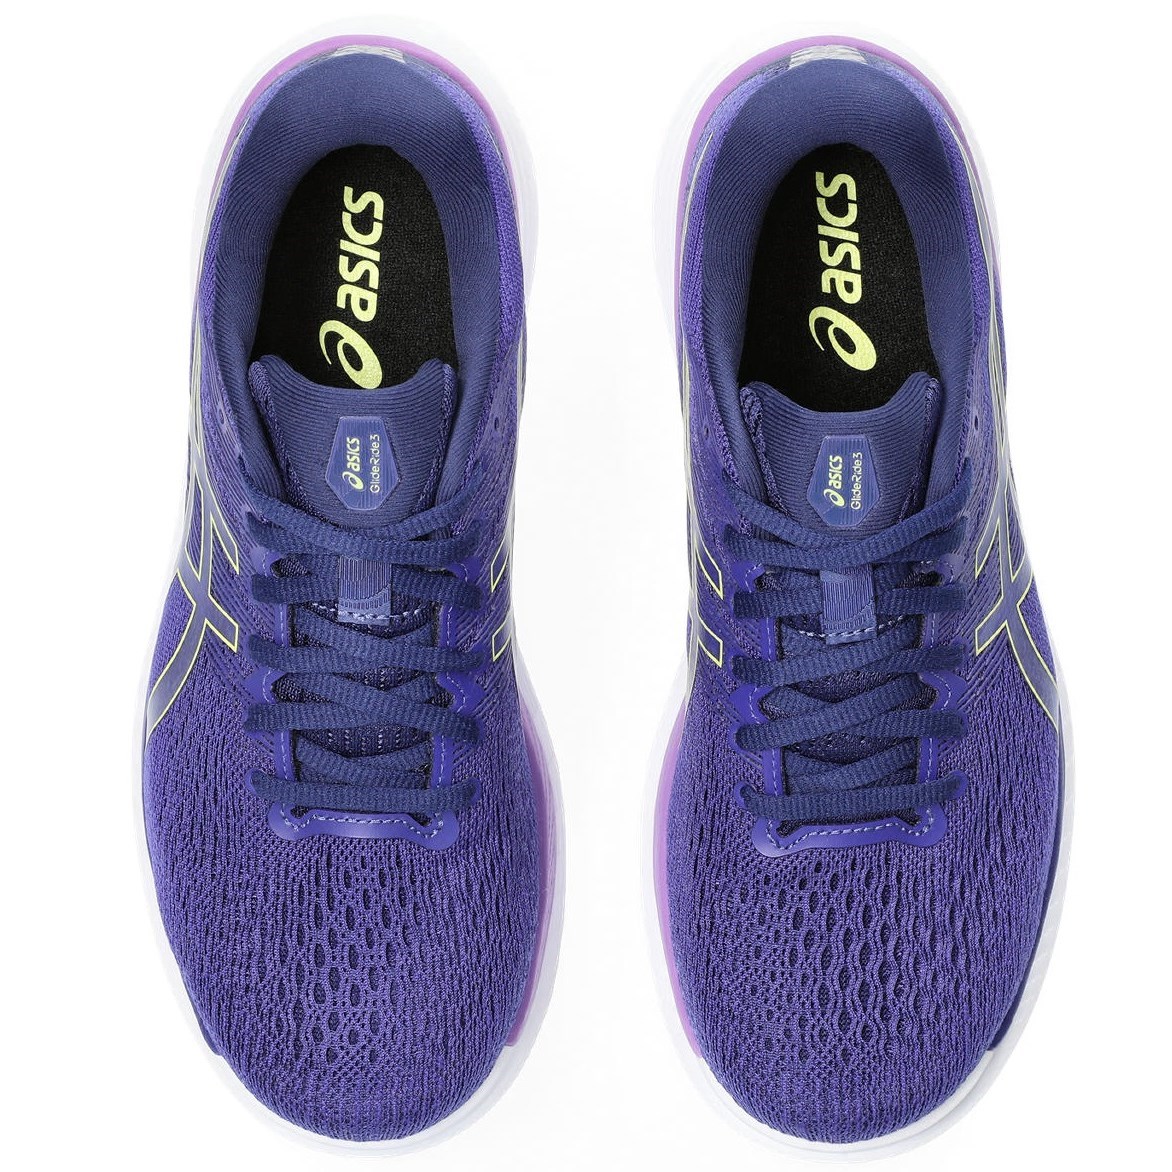 Asics GlideRide 3 - Womens Running Shoes - Dive Blue/Eggplant | Sportitude